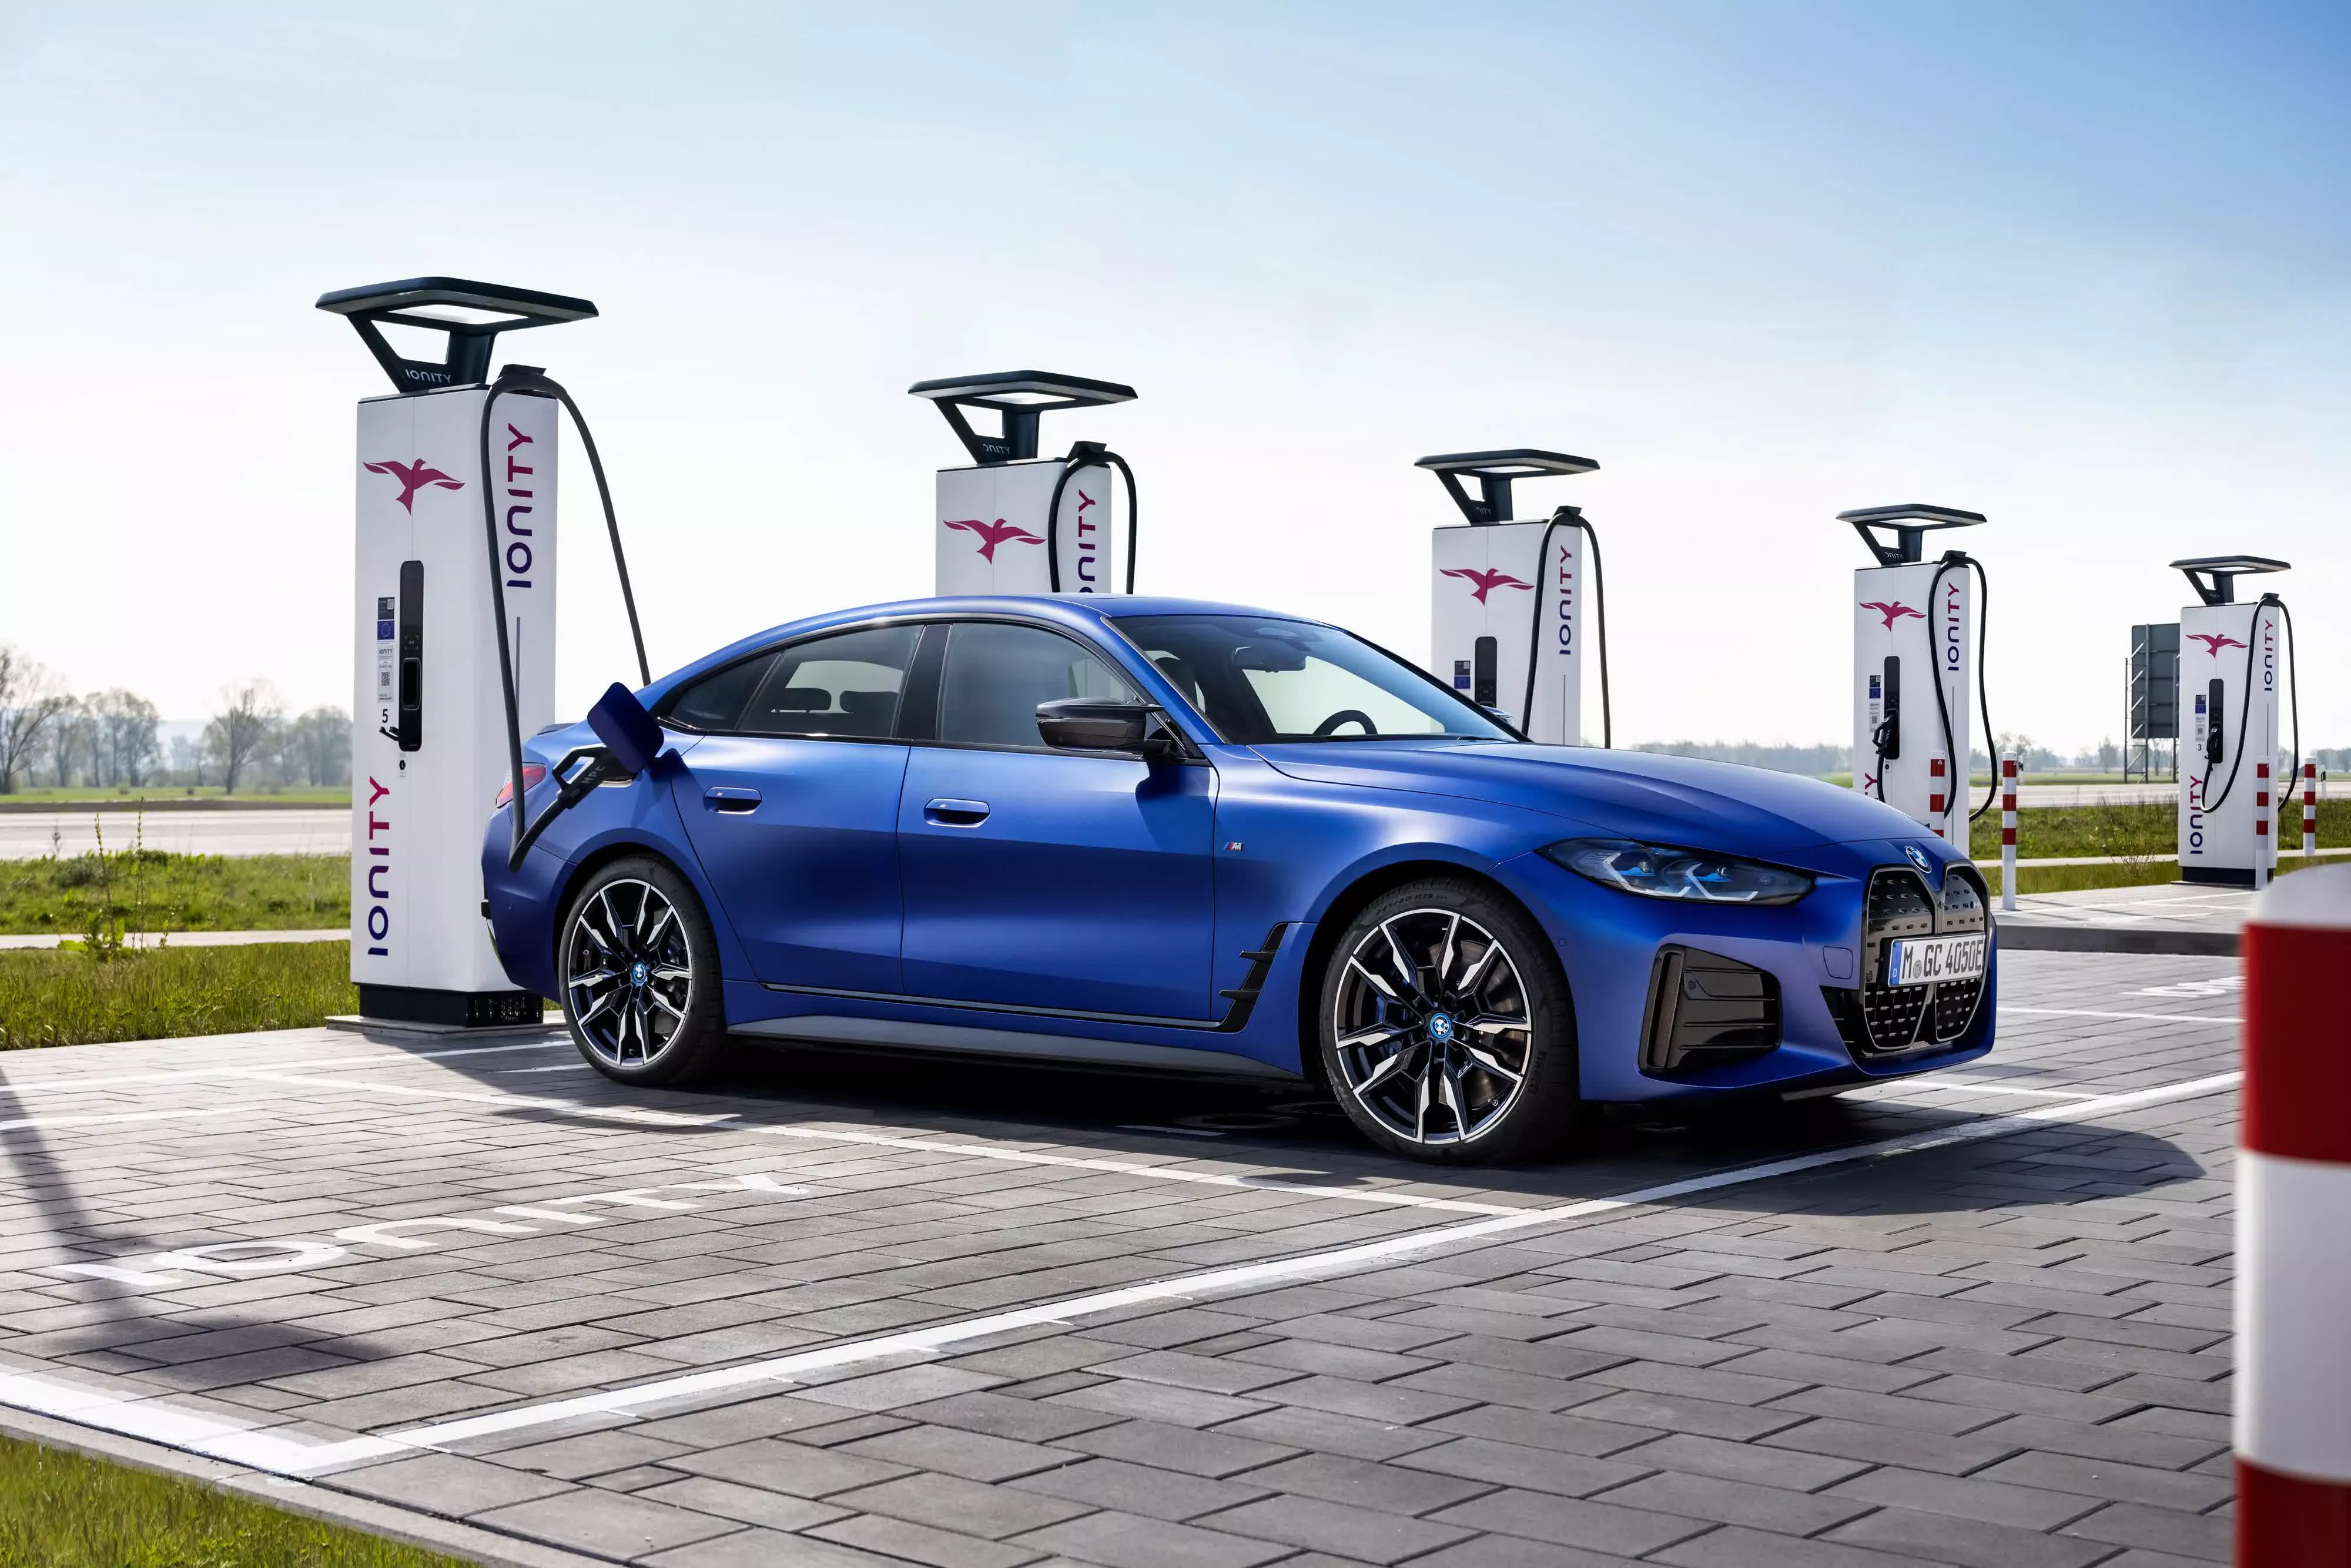 BMW i4 sedan and BMW iX crossover expand pure electric offerings to a